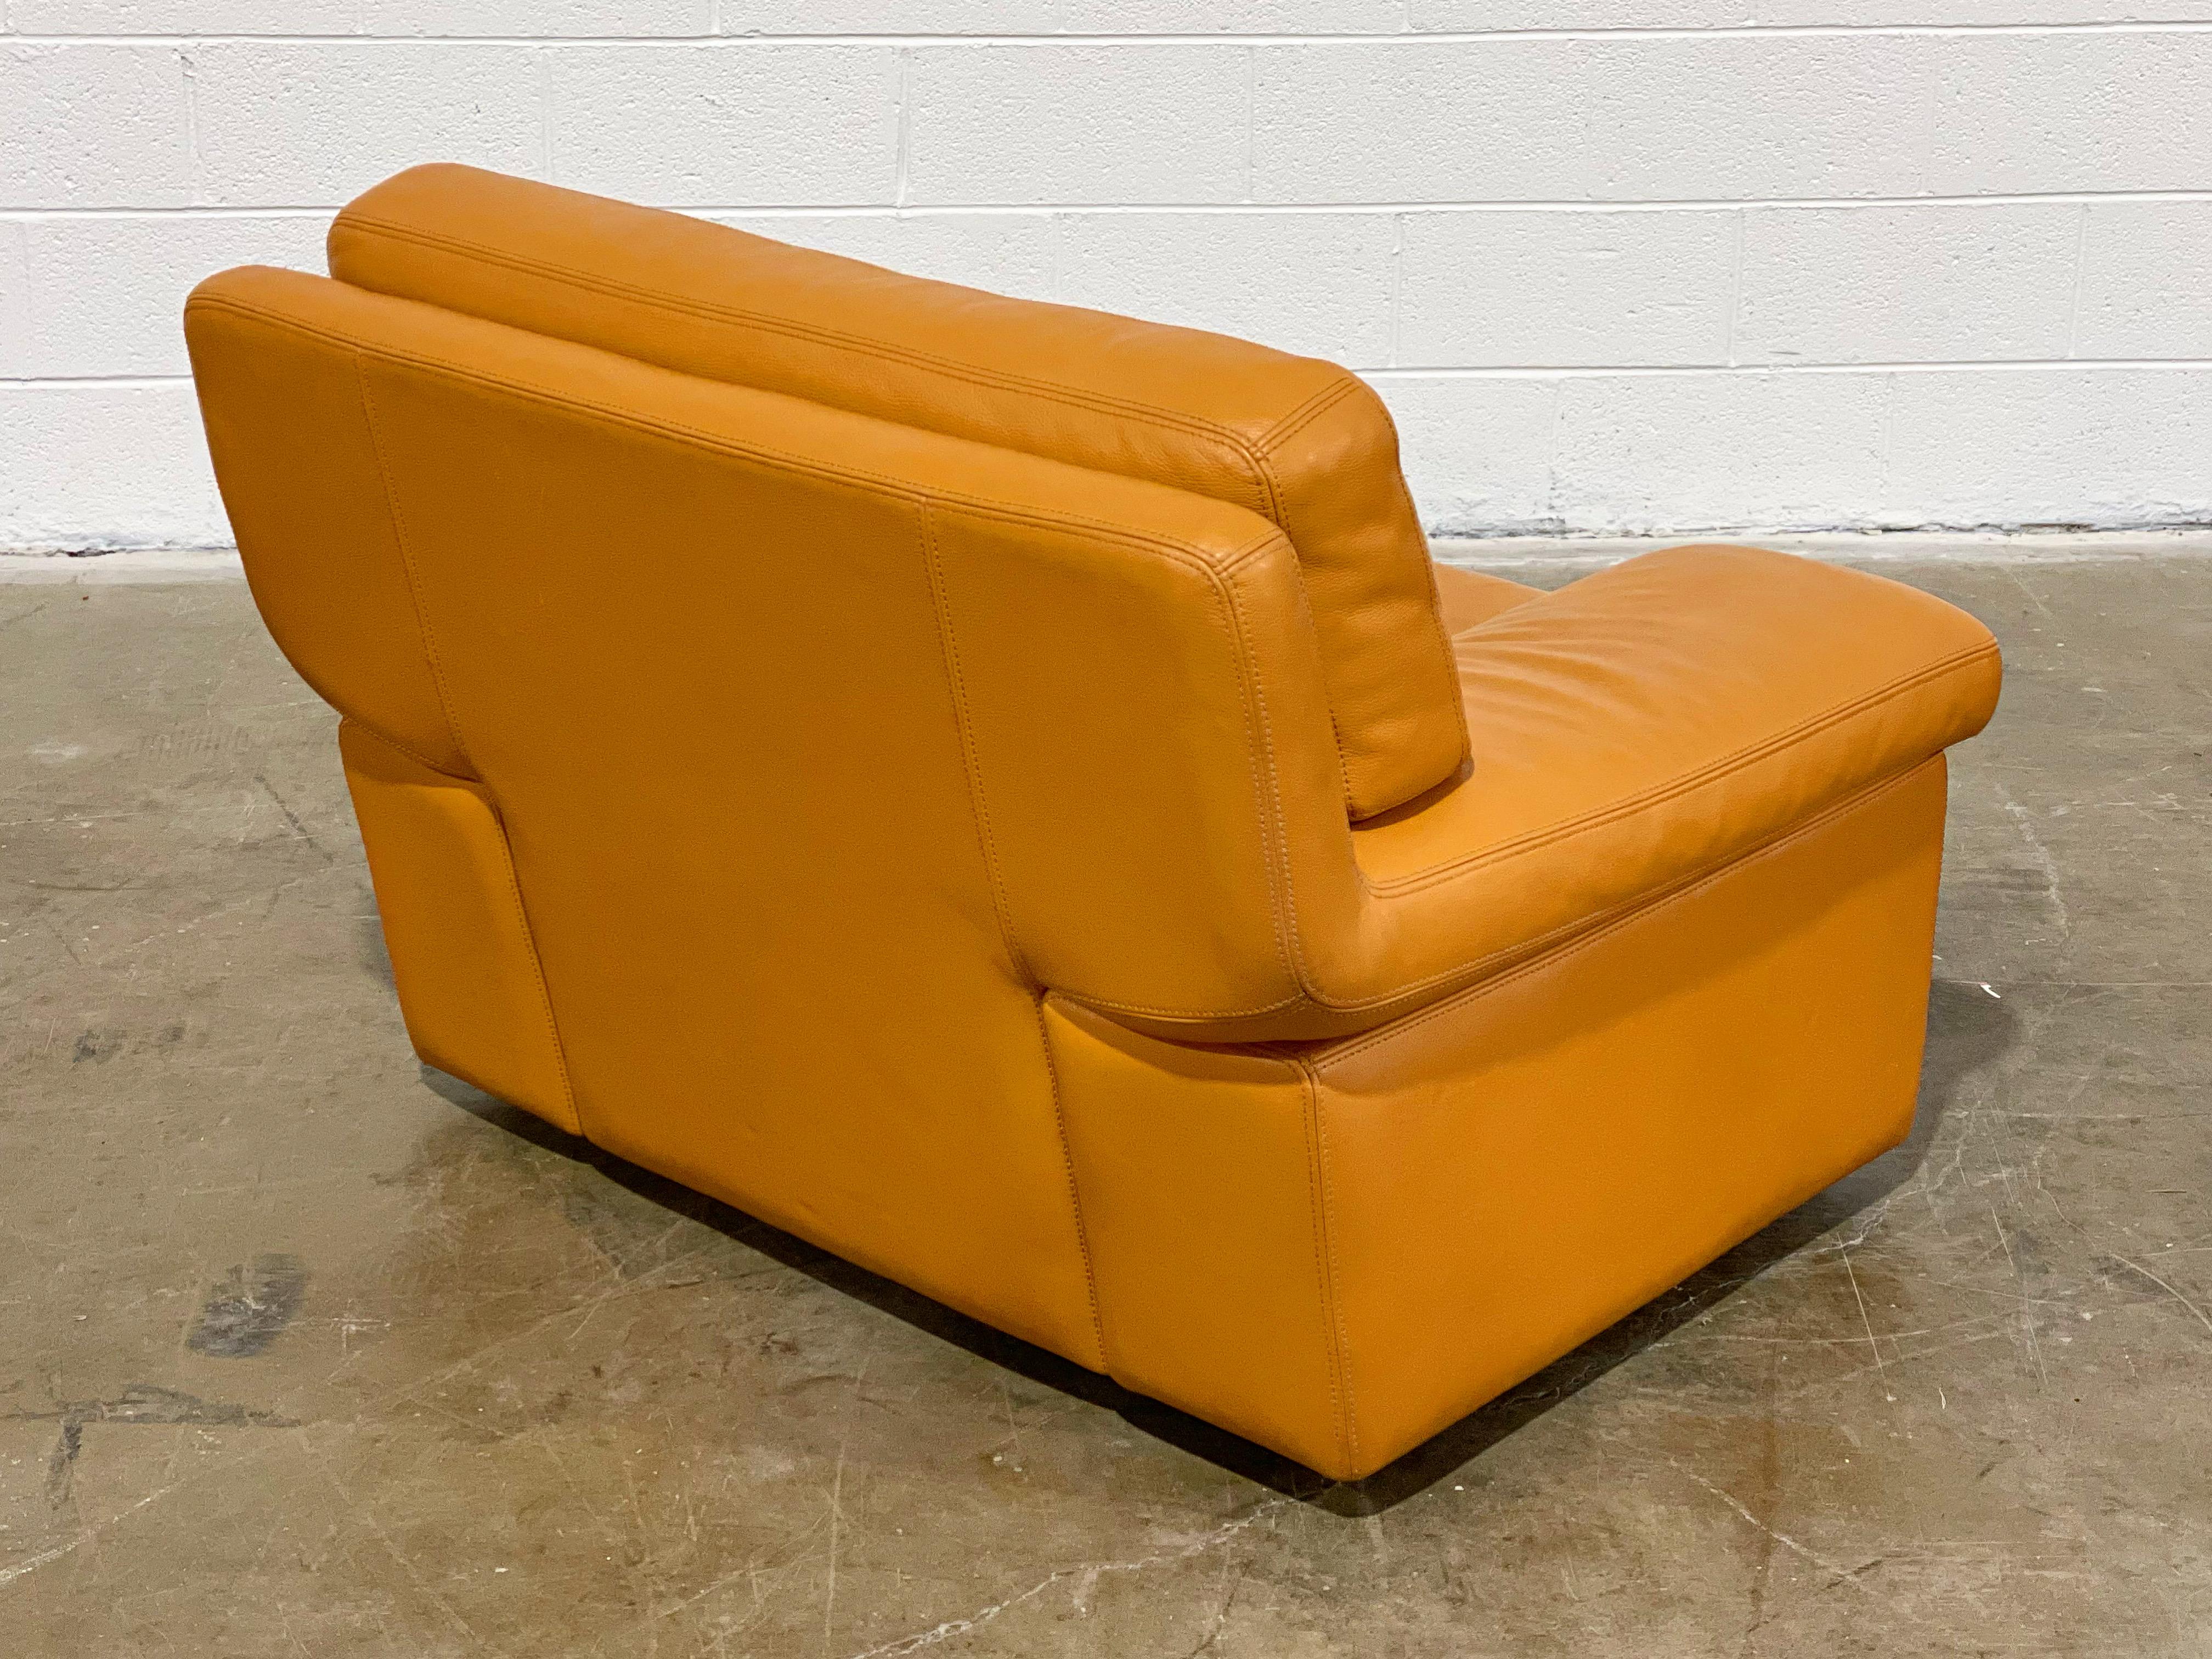 Roche Bobois Vintage Post Modern Leather Club Chair, Butterscotch Tone Leather 2